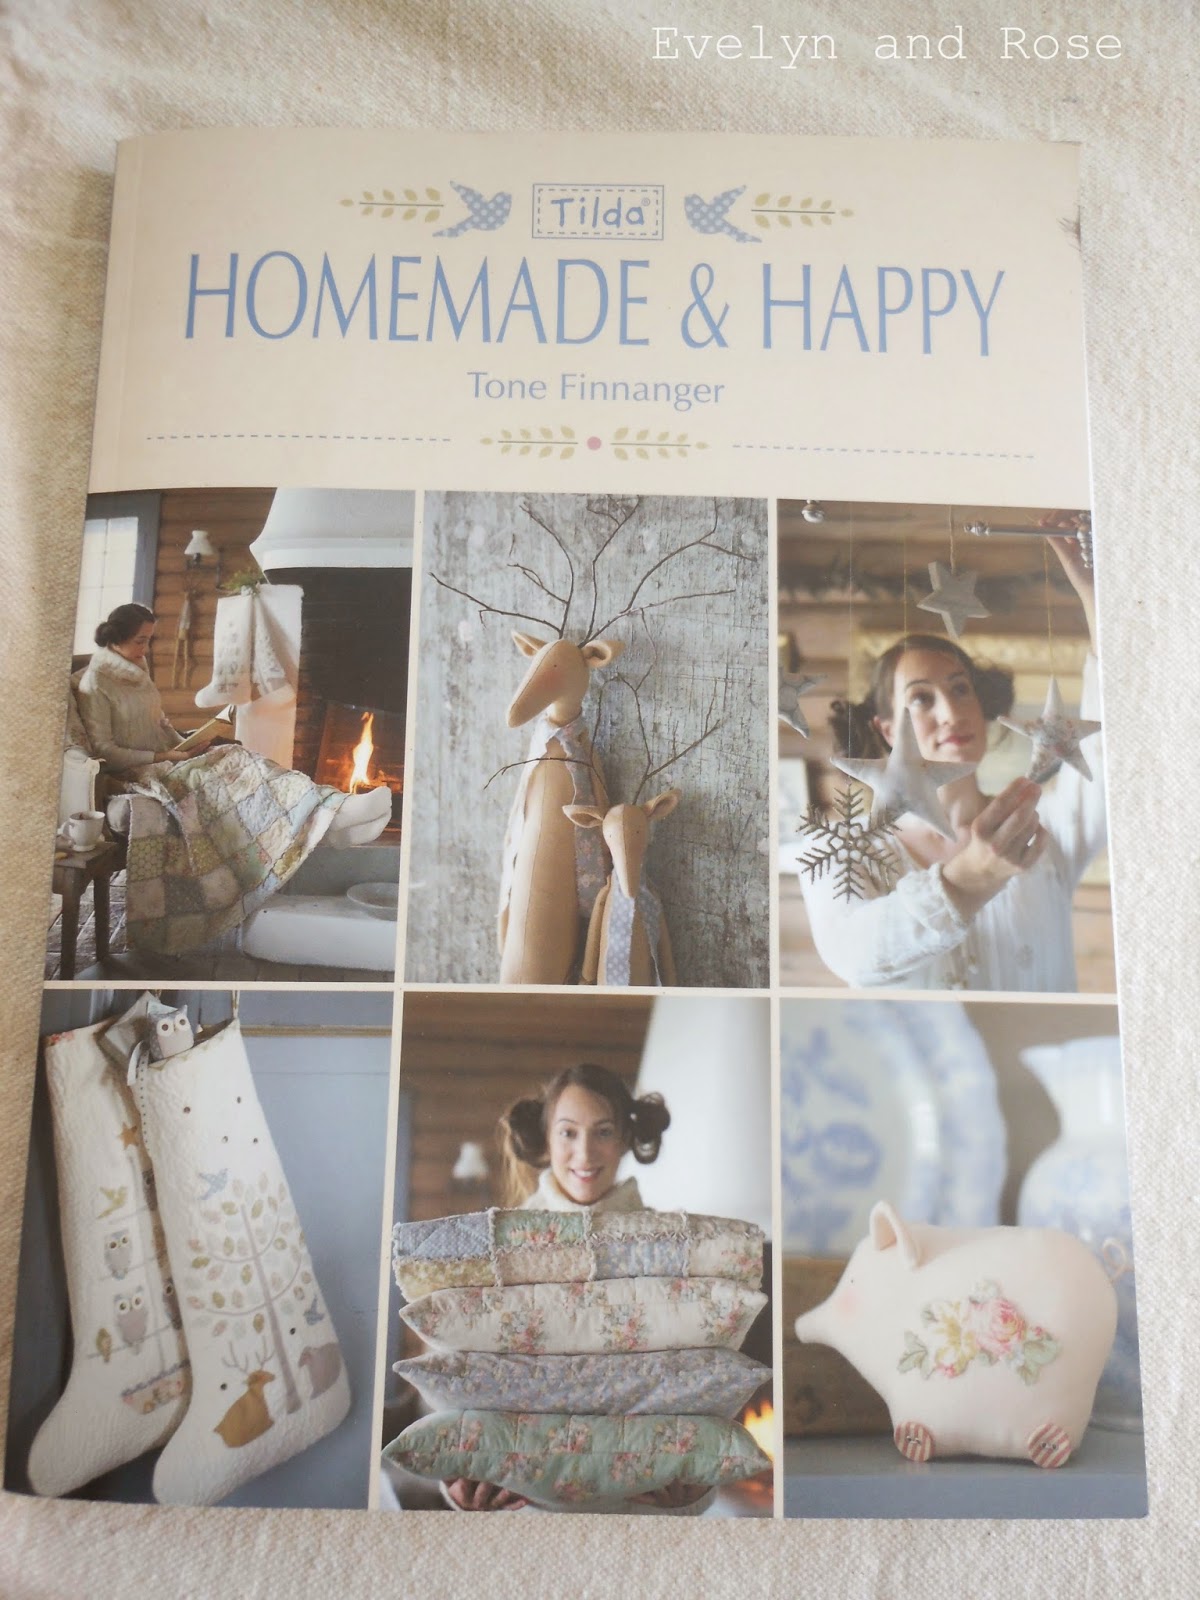 Evelyn And Rose Tilda Book Homemade And Happy